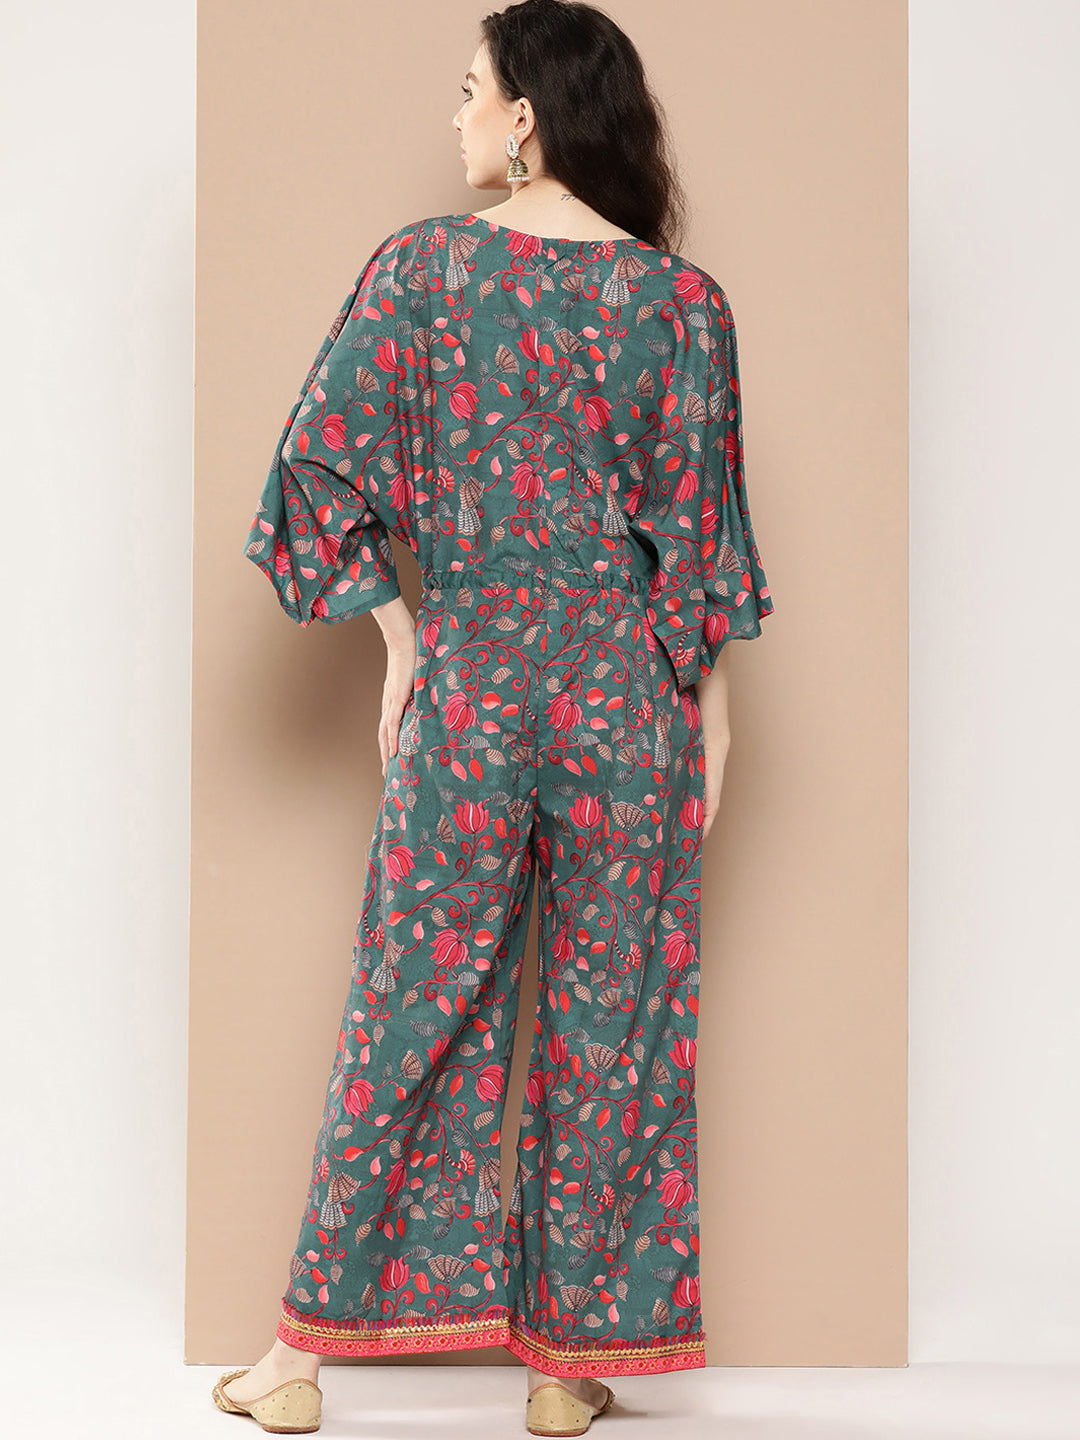 Green & Pink Printed Jumpsuit with Lace Inserts